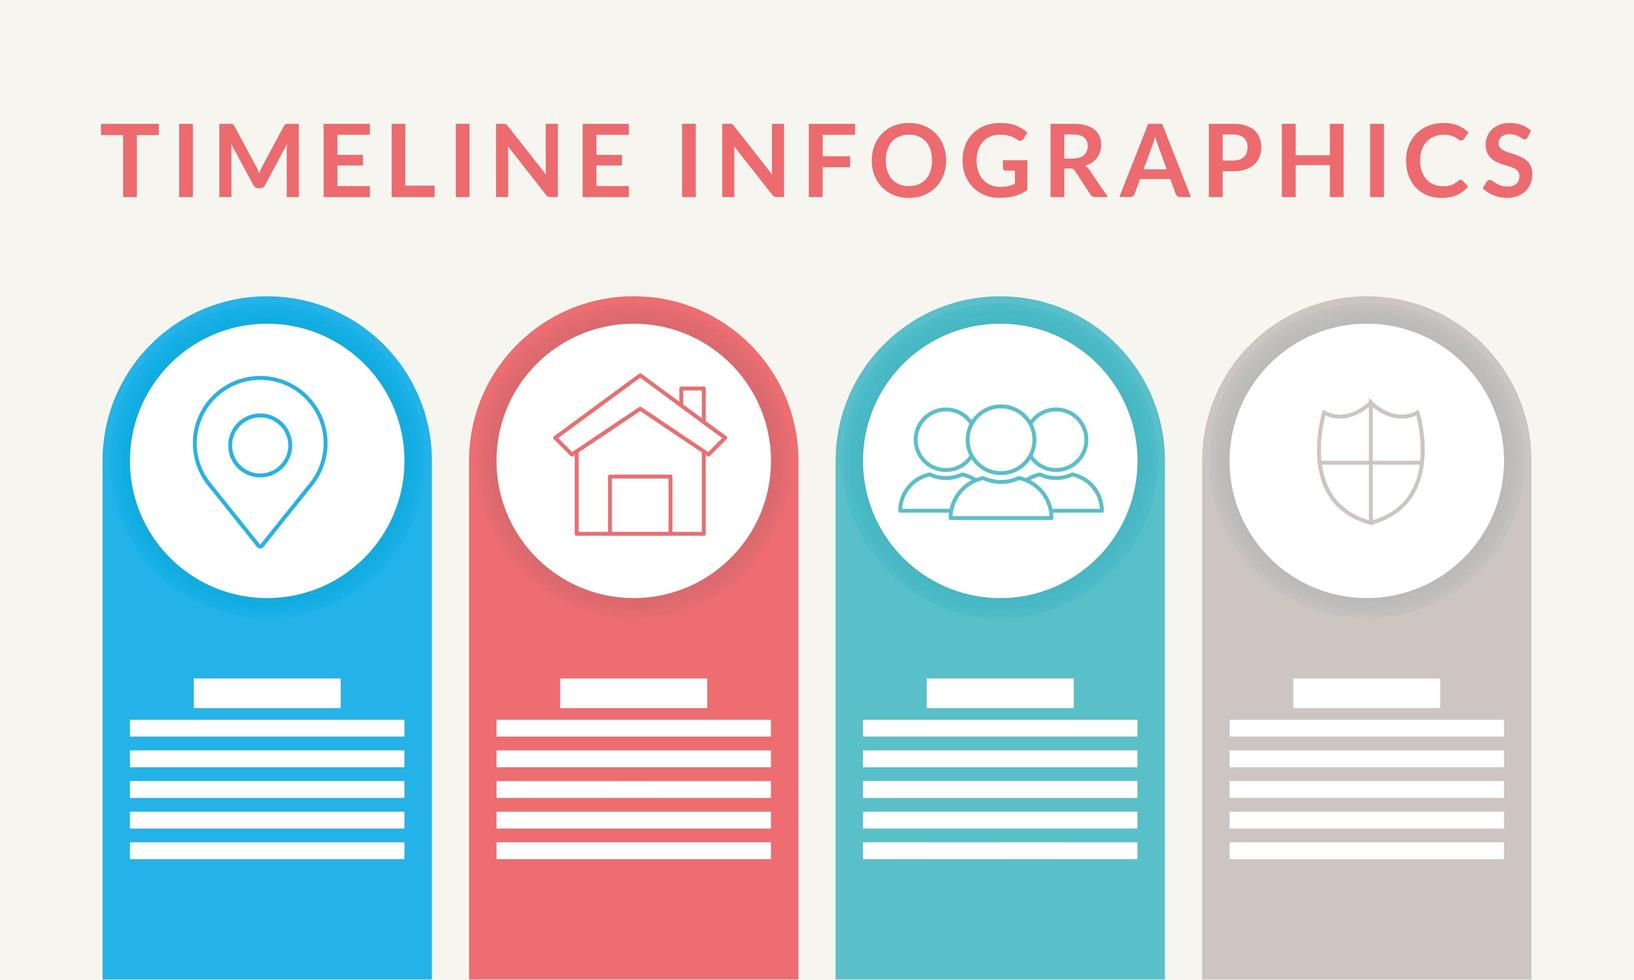 Timeline Infographic with icons vector